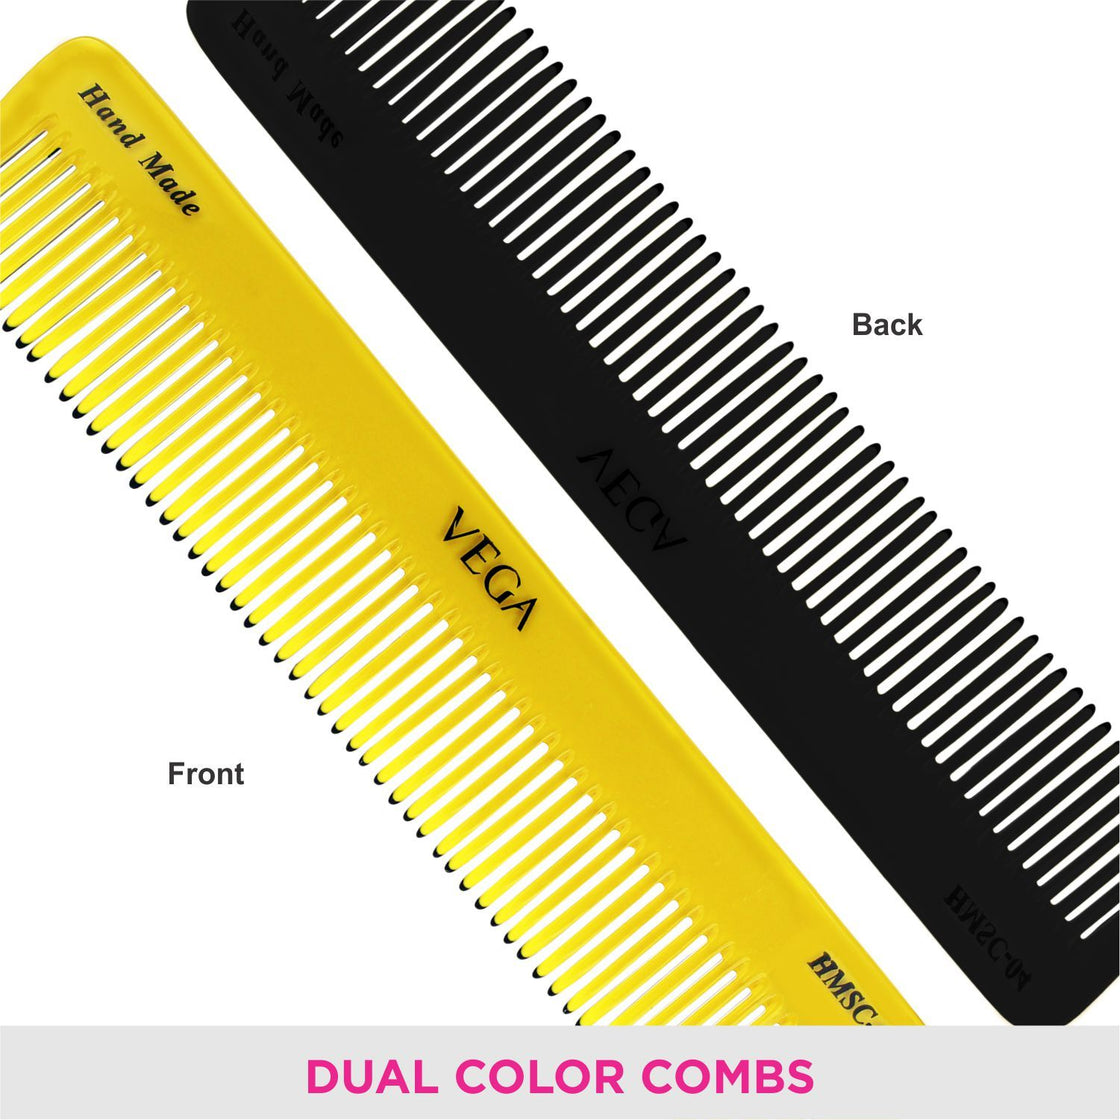 Vega Hmsc-04 Dual Color Comb (Color May Vary)